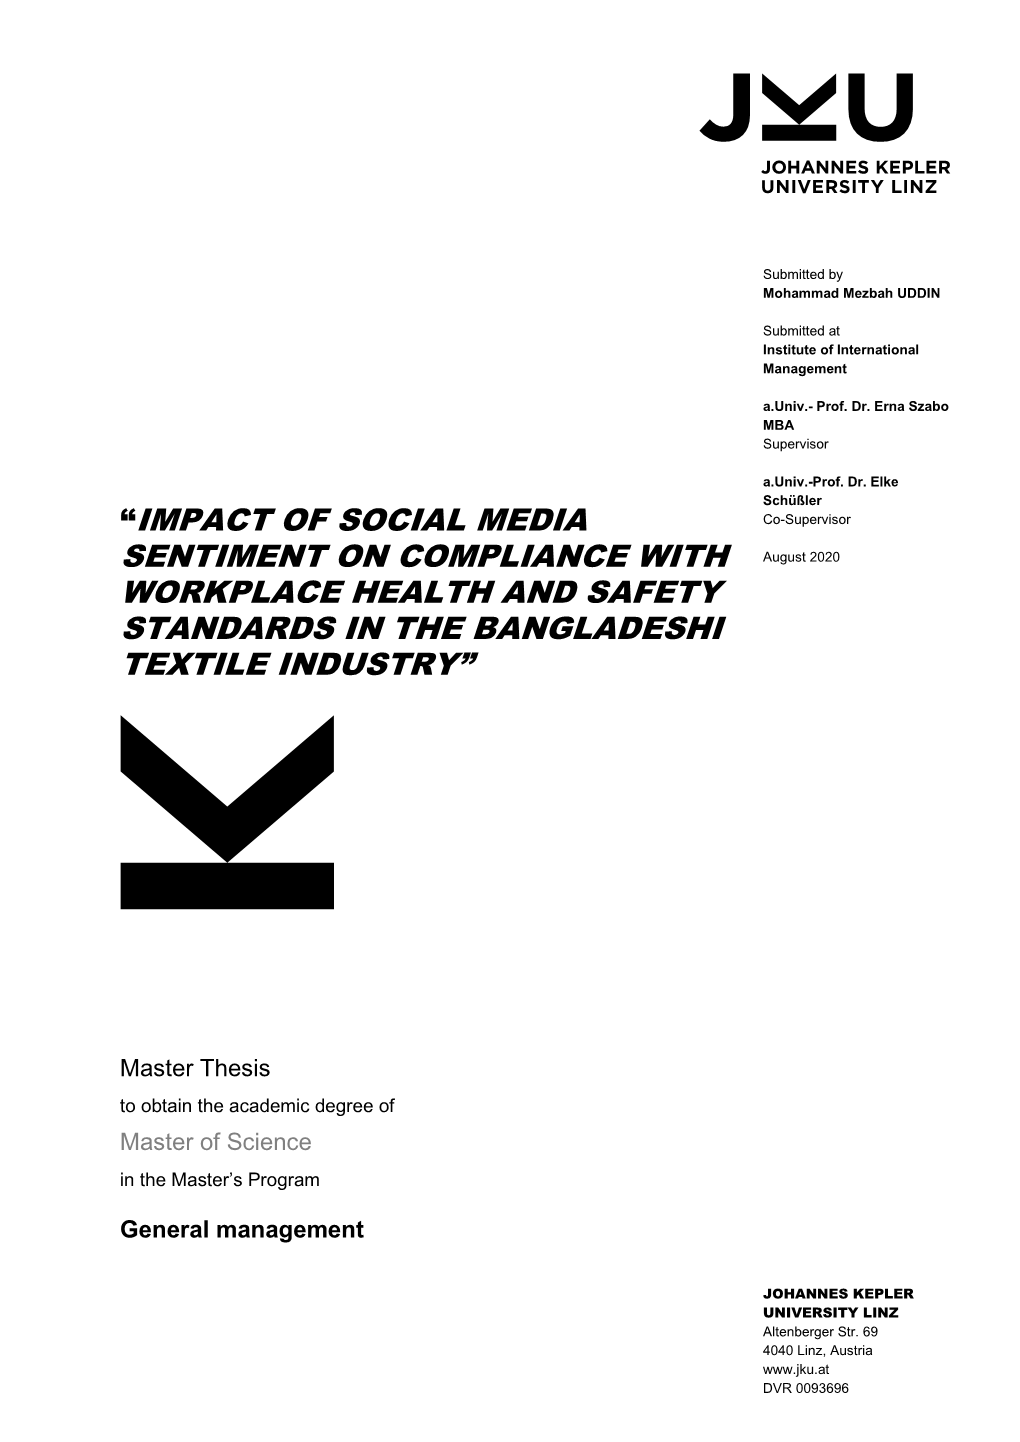 Impact of Social Media Sentiment on Compliance with Workplace Health and Safety Standards in the Bangladeshi Textile Industry